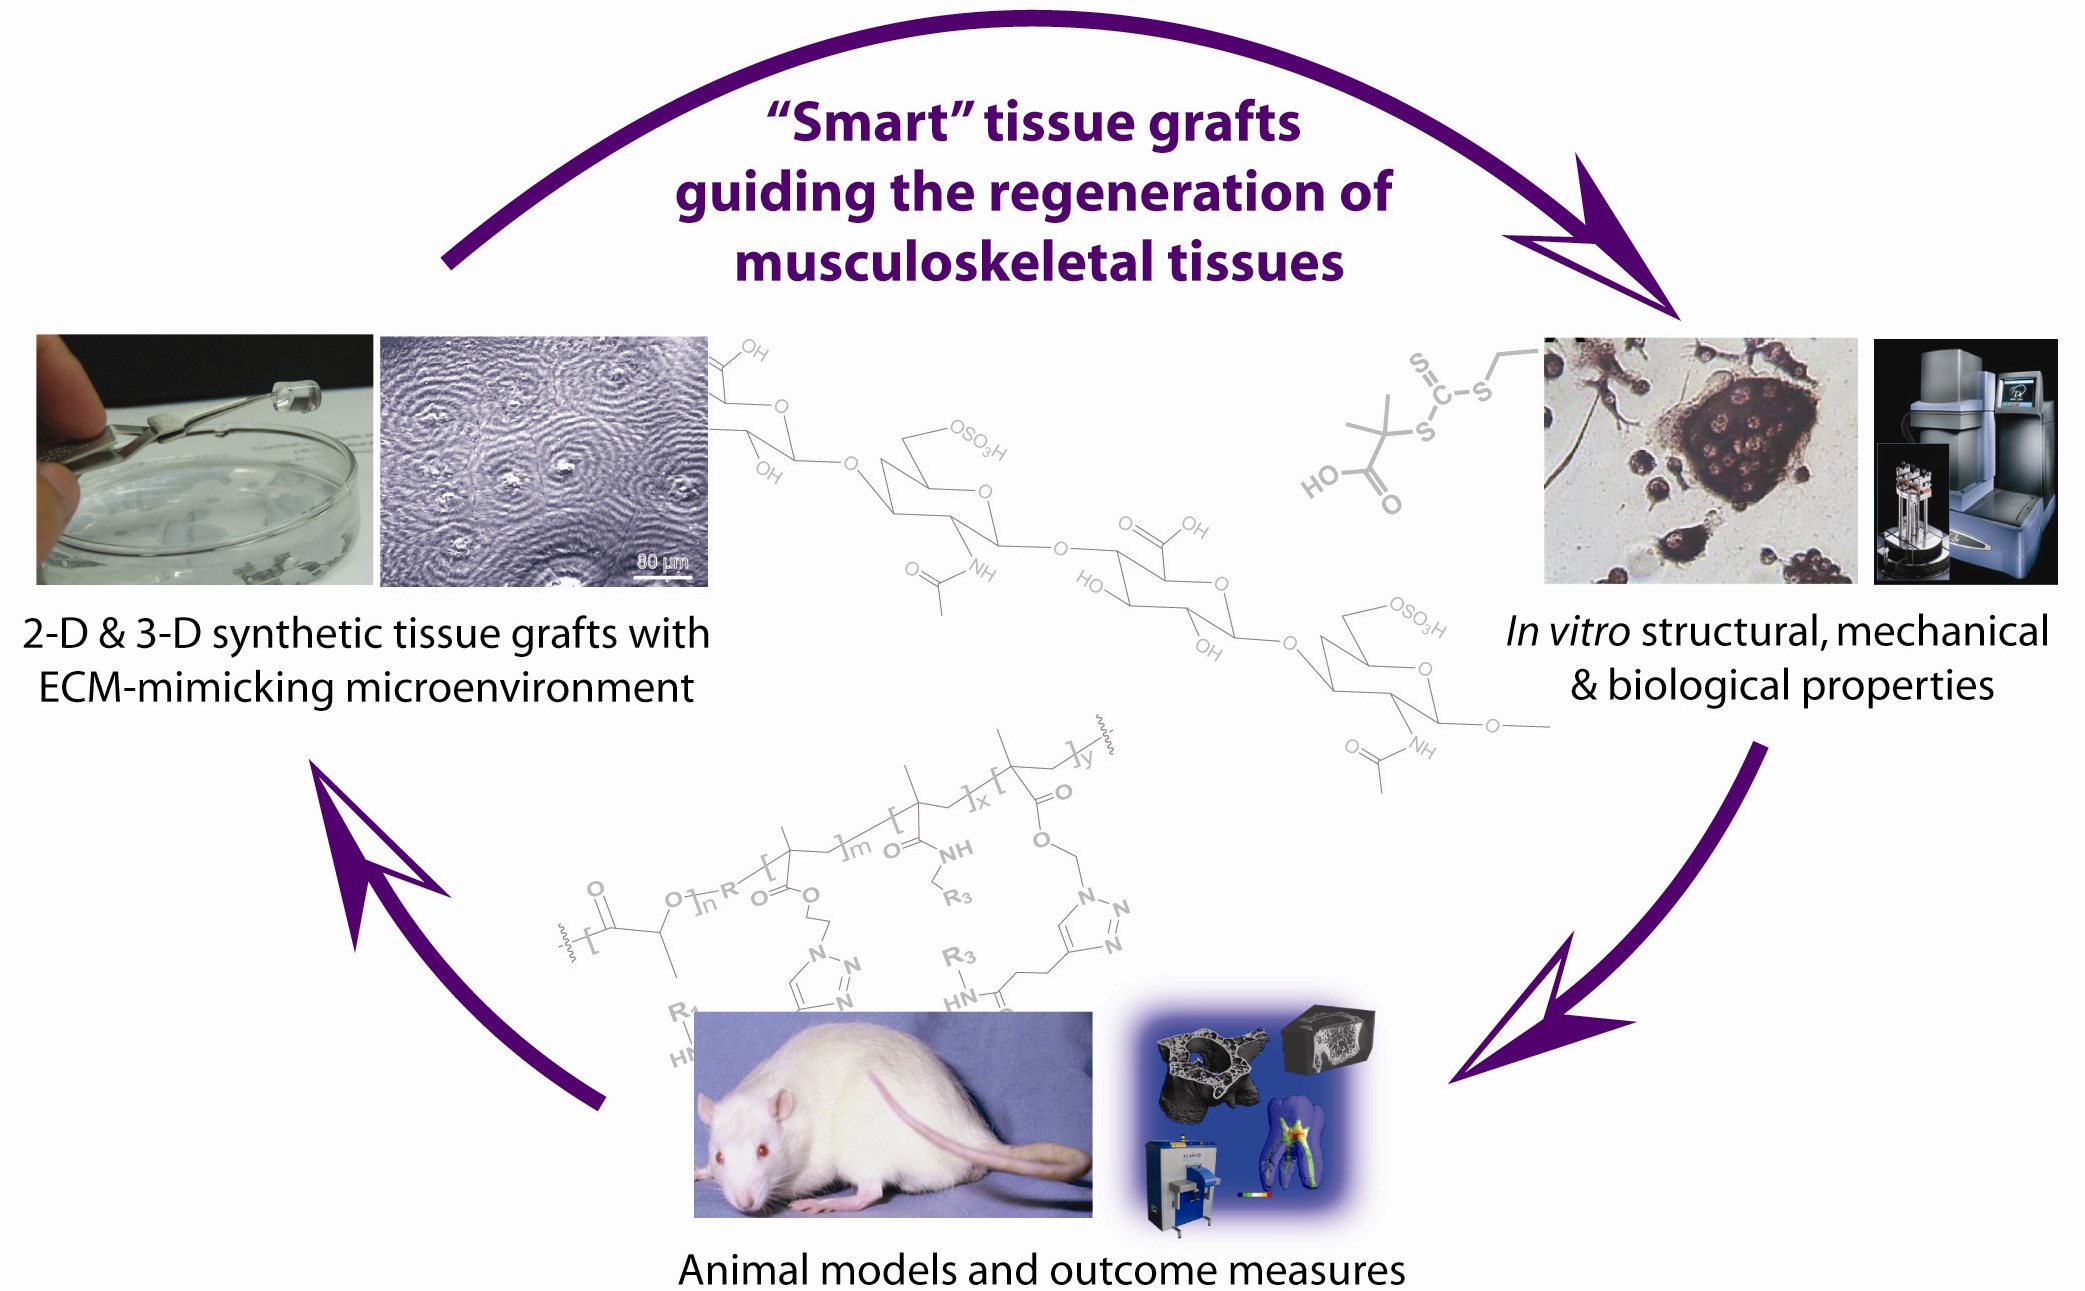 Synthetic tissue grafts and smart implants guiding the repair and regeneration of musculoskeletal tissues